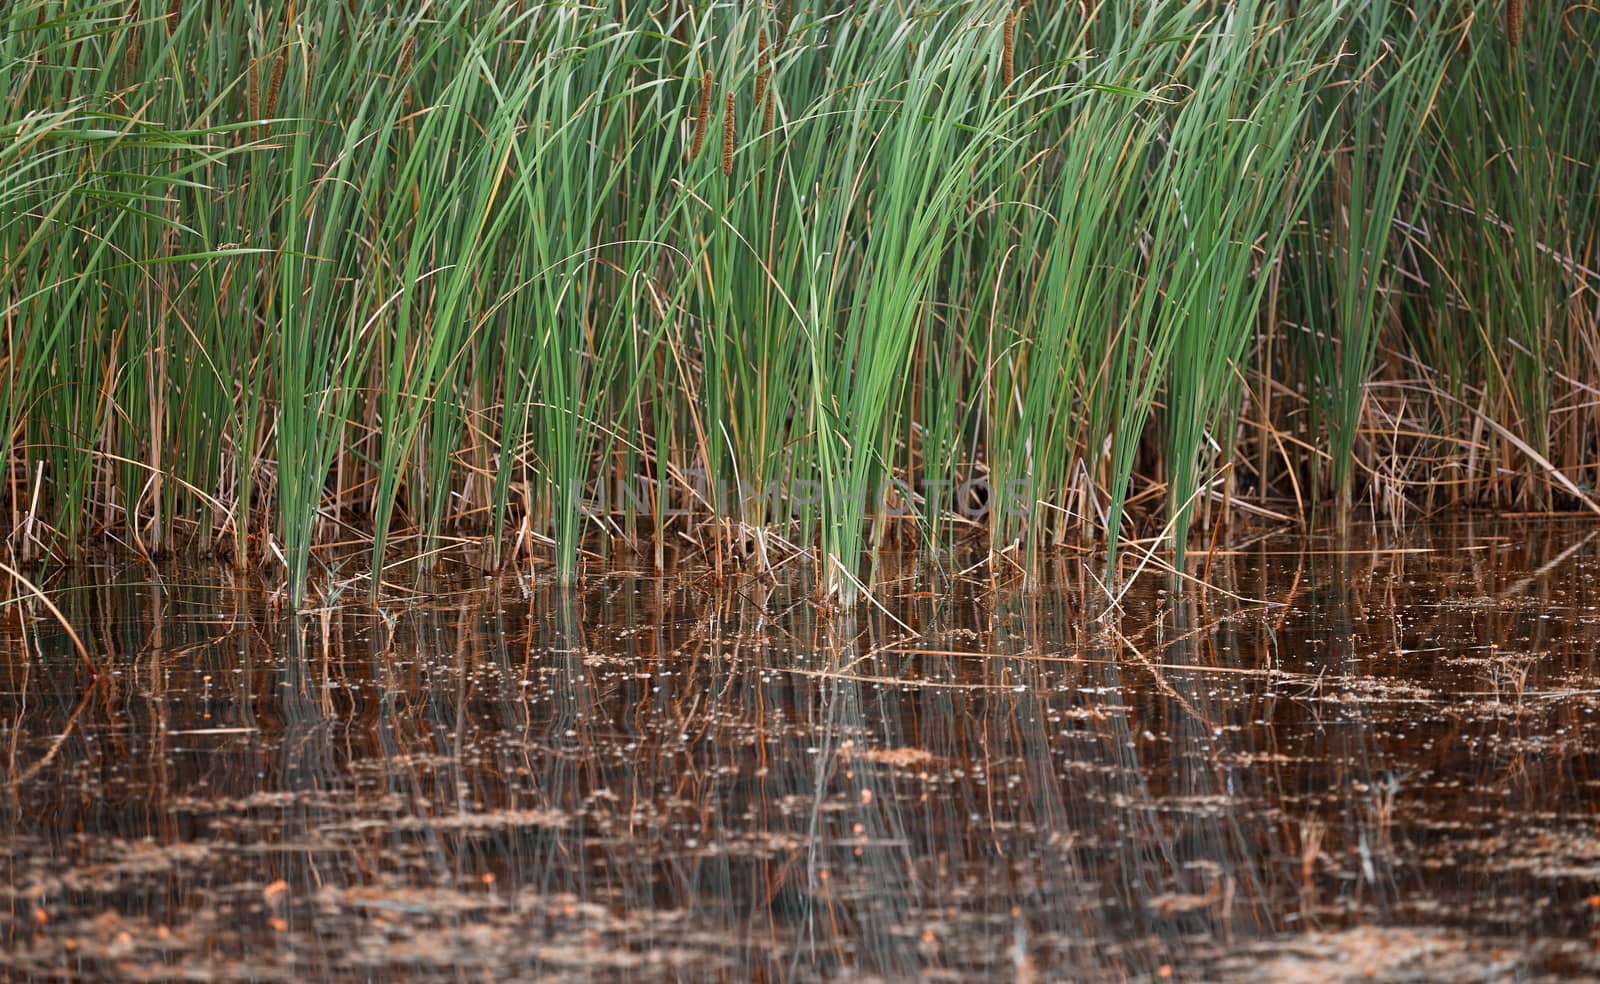 Reed plants in open water of the Florida lake